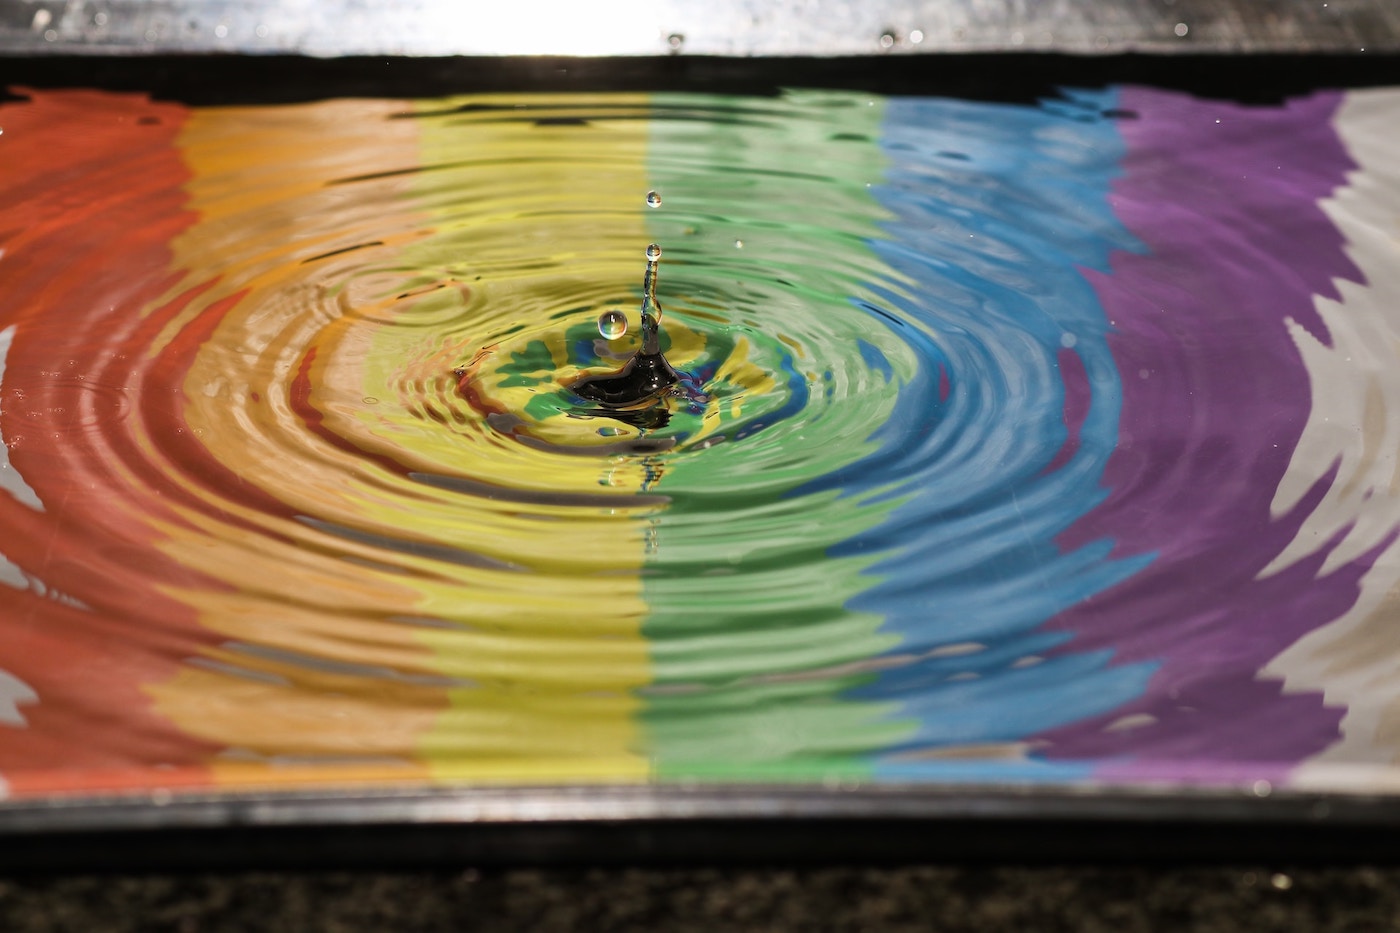 Reflection of a rainbow flag in water with a drop of water causing ripples.